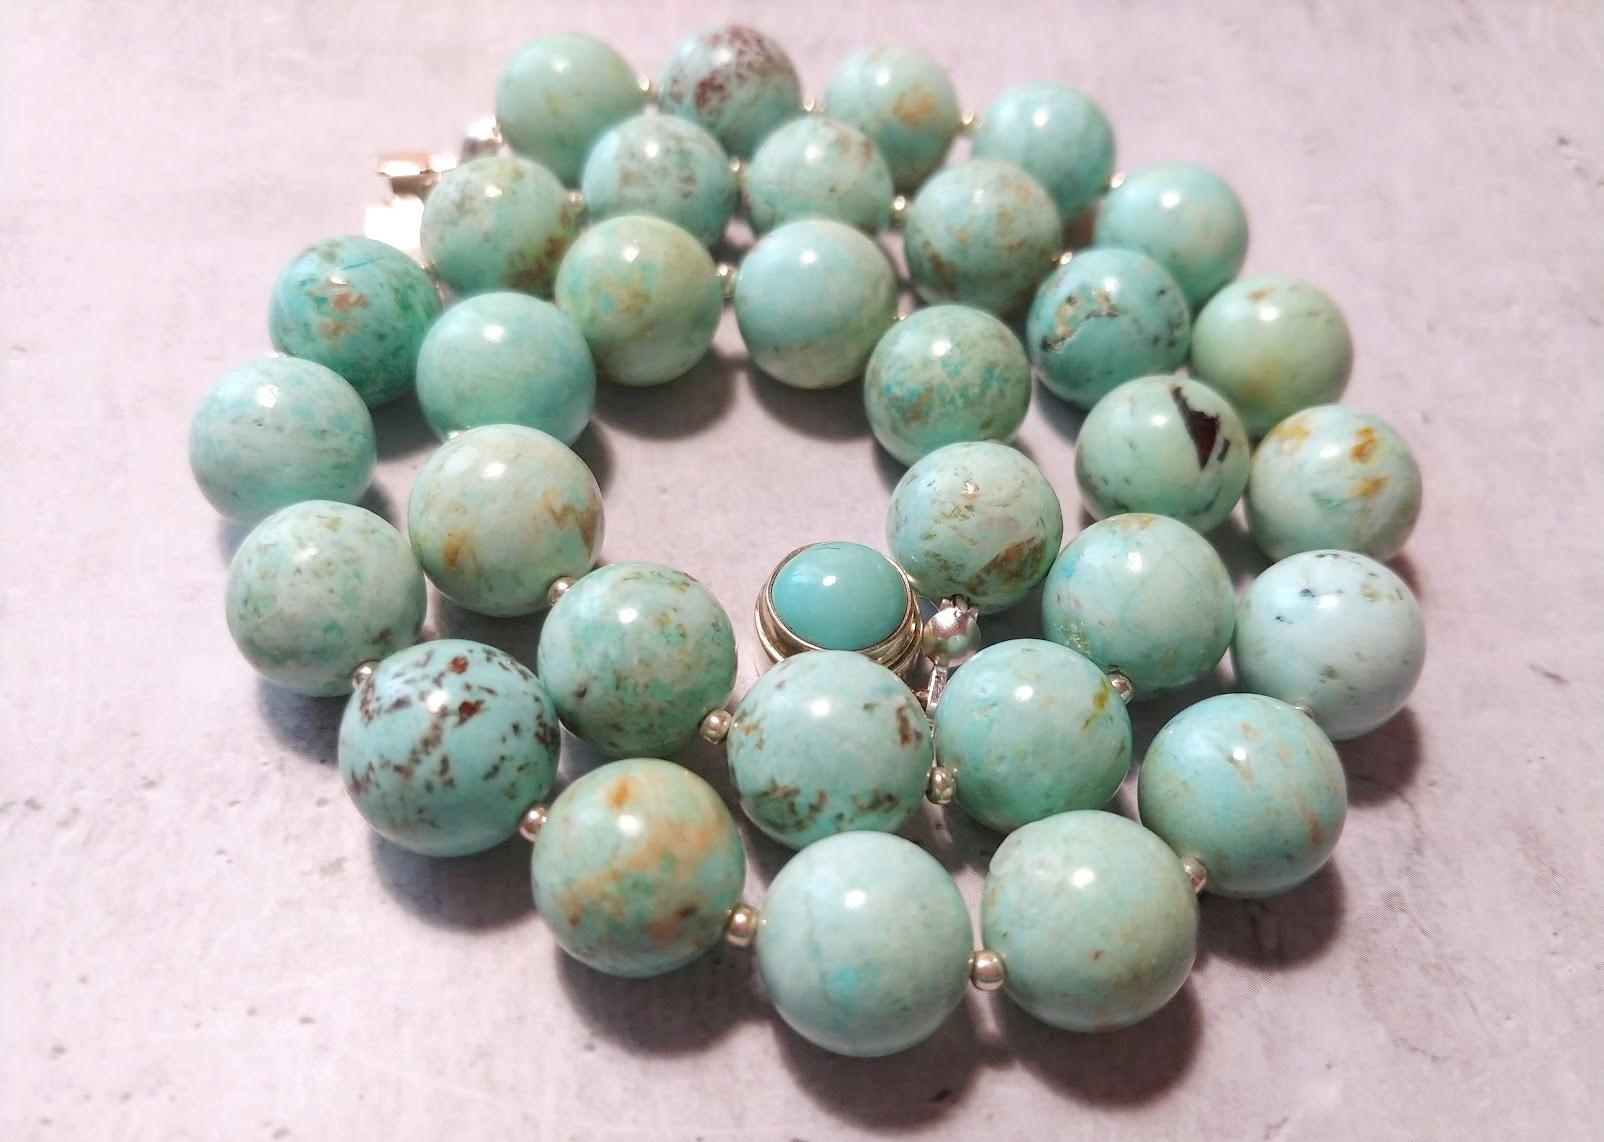 The necklace is 18 inches (45.7 cm) long. The smooth round beads are 12 mm in size. 
Peruvian turquoise has a gorgeous light blue-green color, or how can call it 